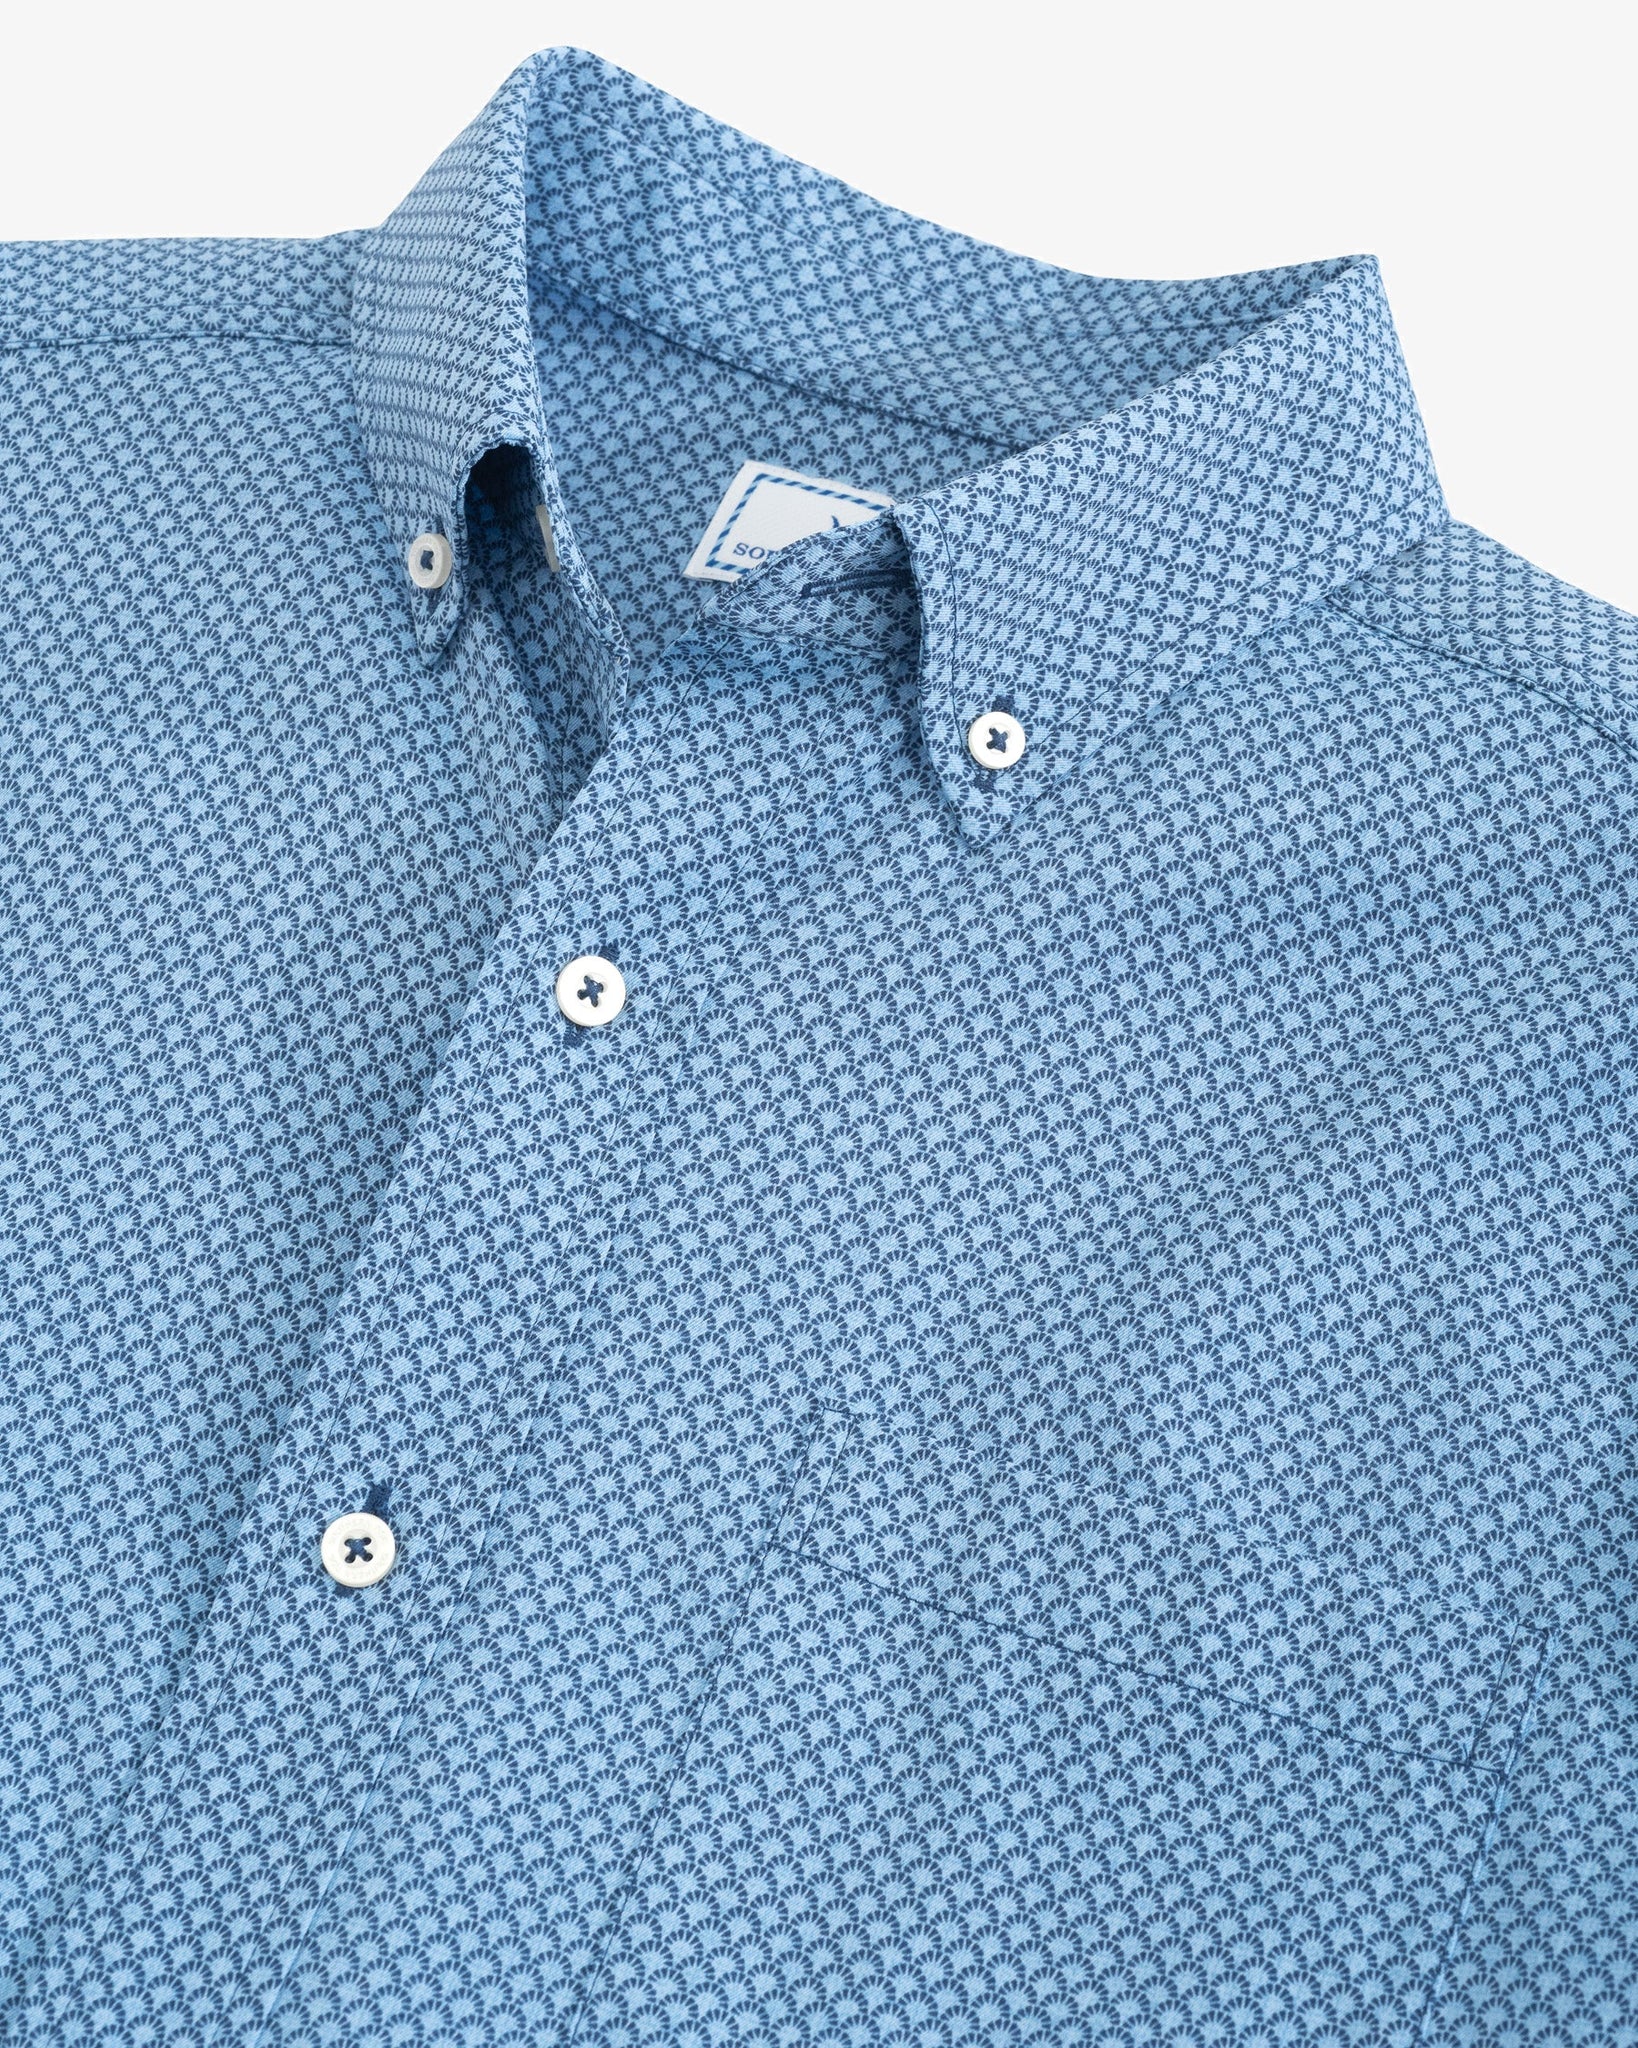 Southern Tide: Classic Southern Clothes for Men, Women & Kids